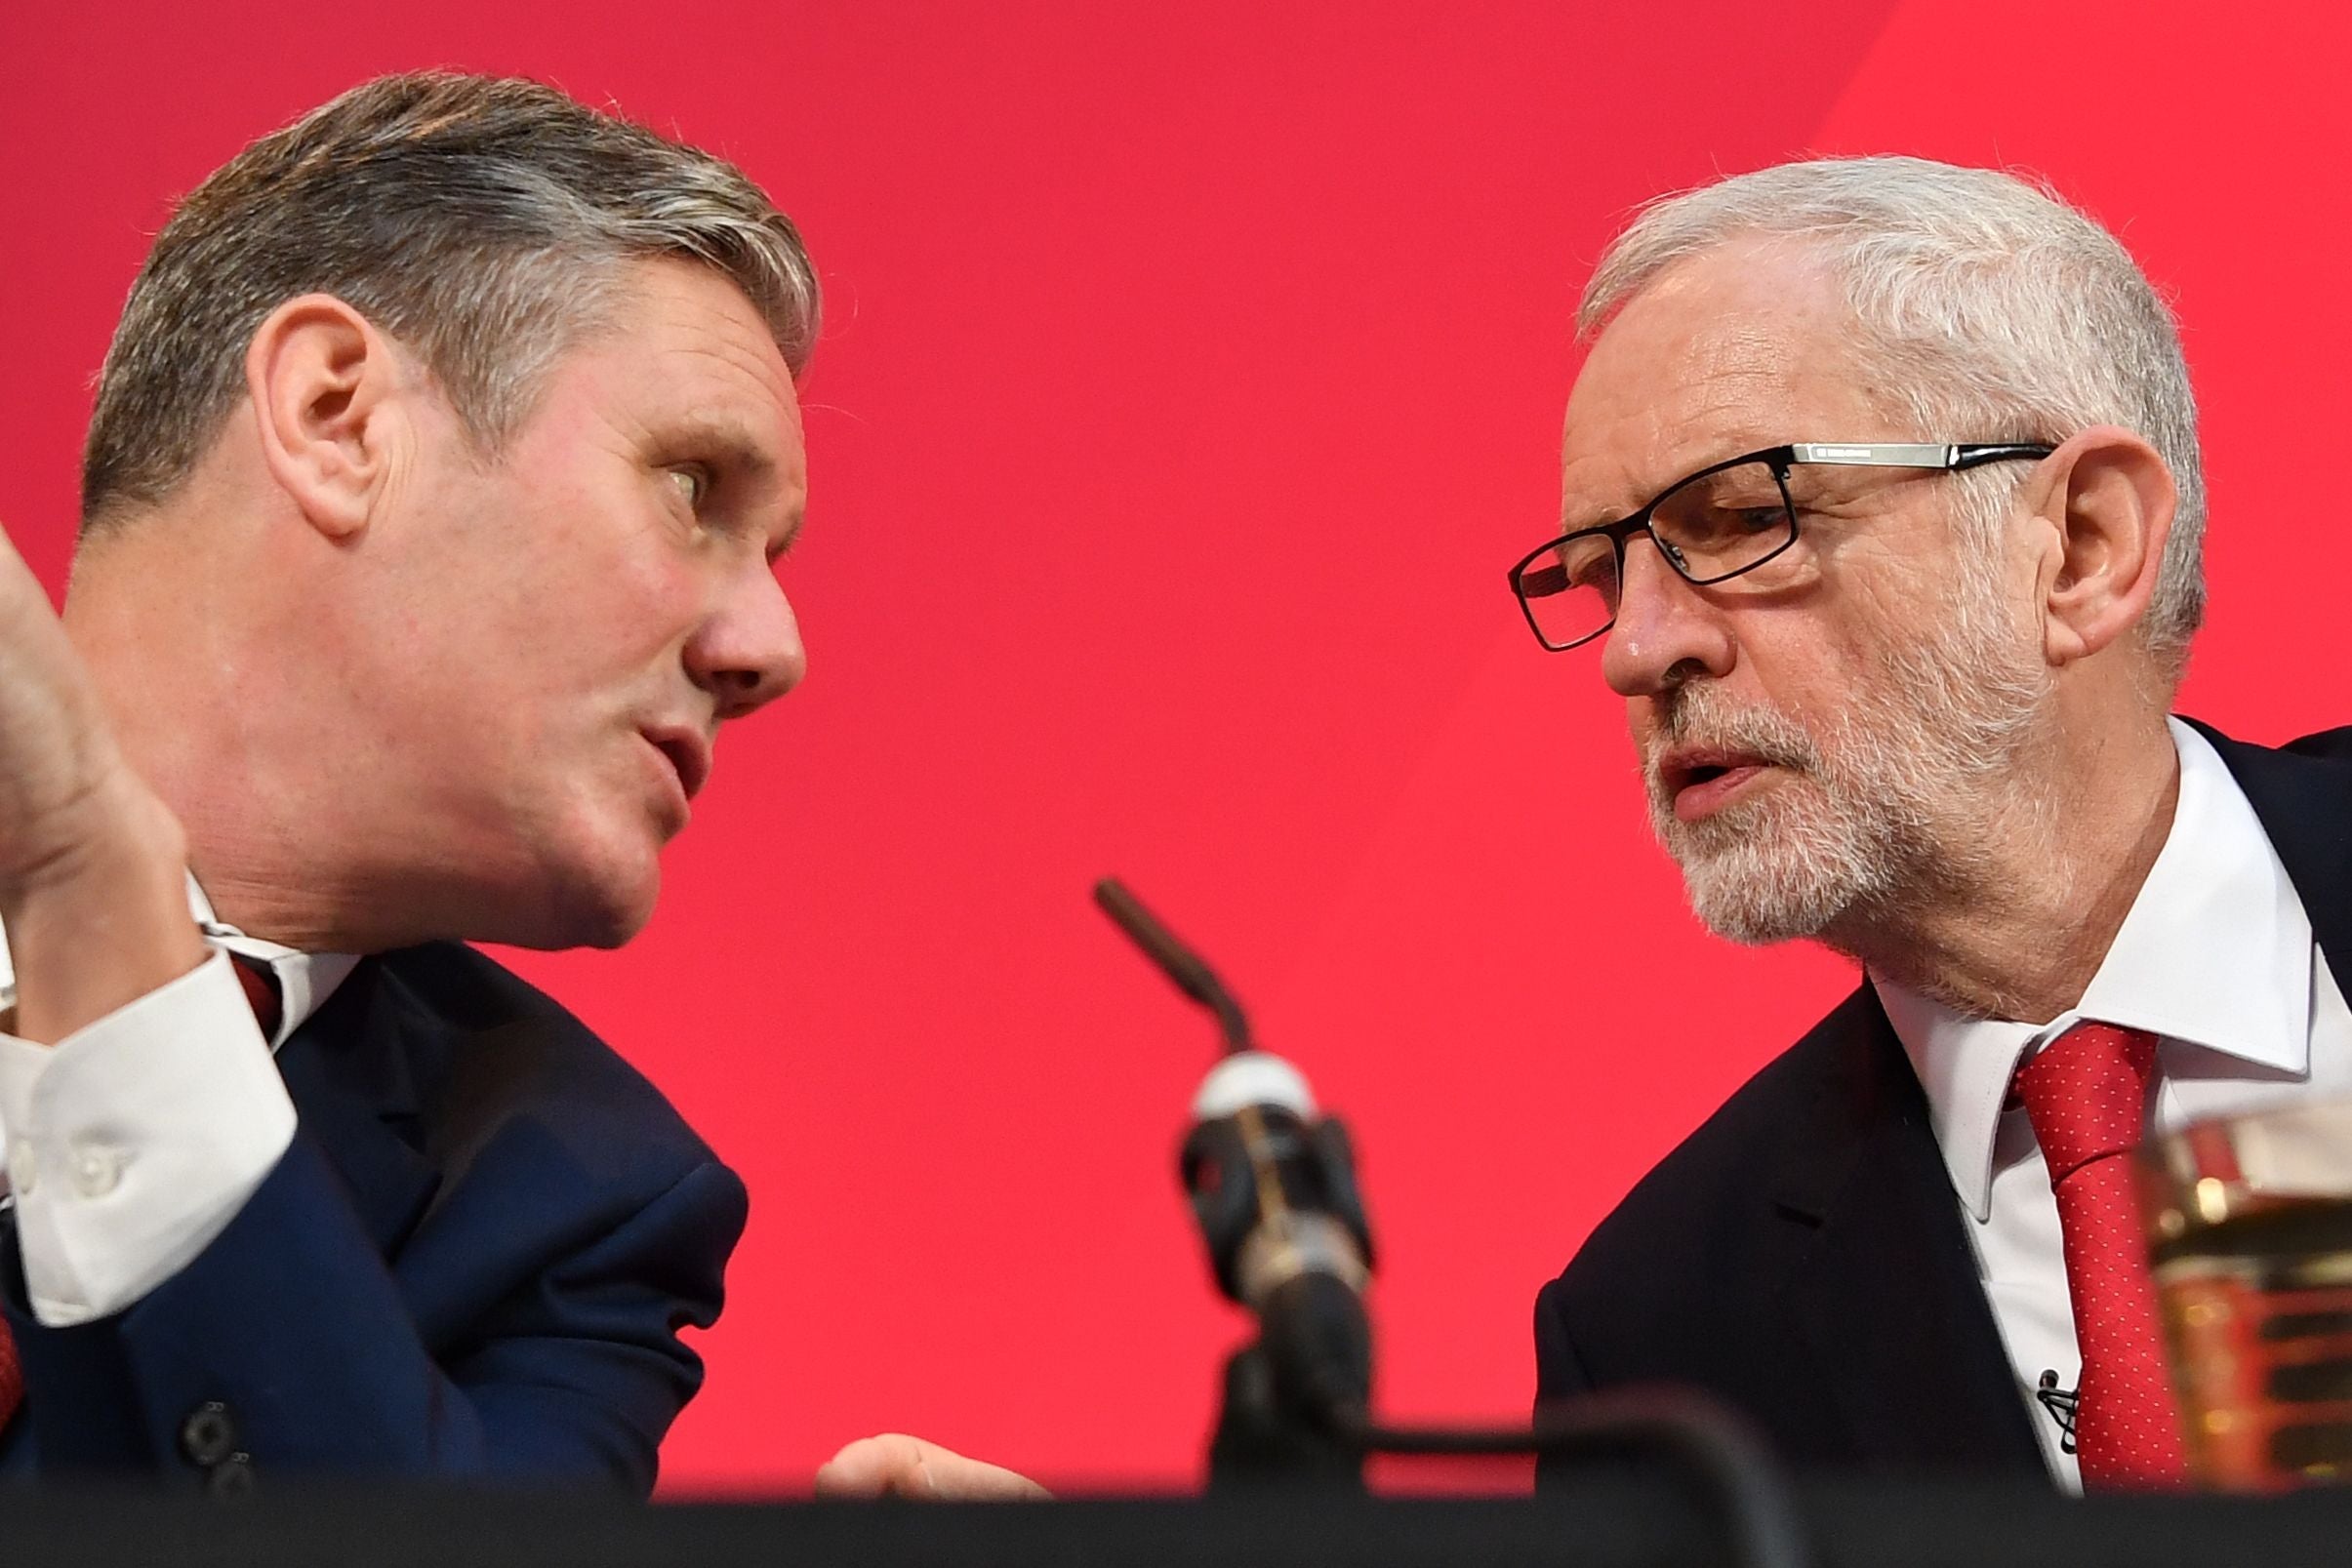 Keir Starmer confers with Jeremy Corbyn during a press conference during the 2019 election campaign